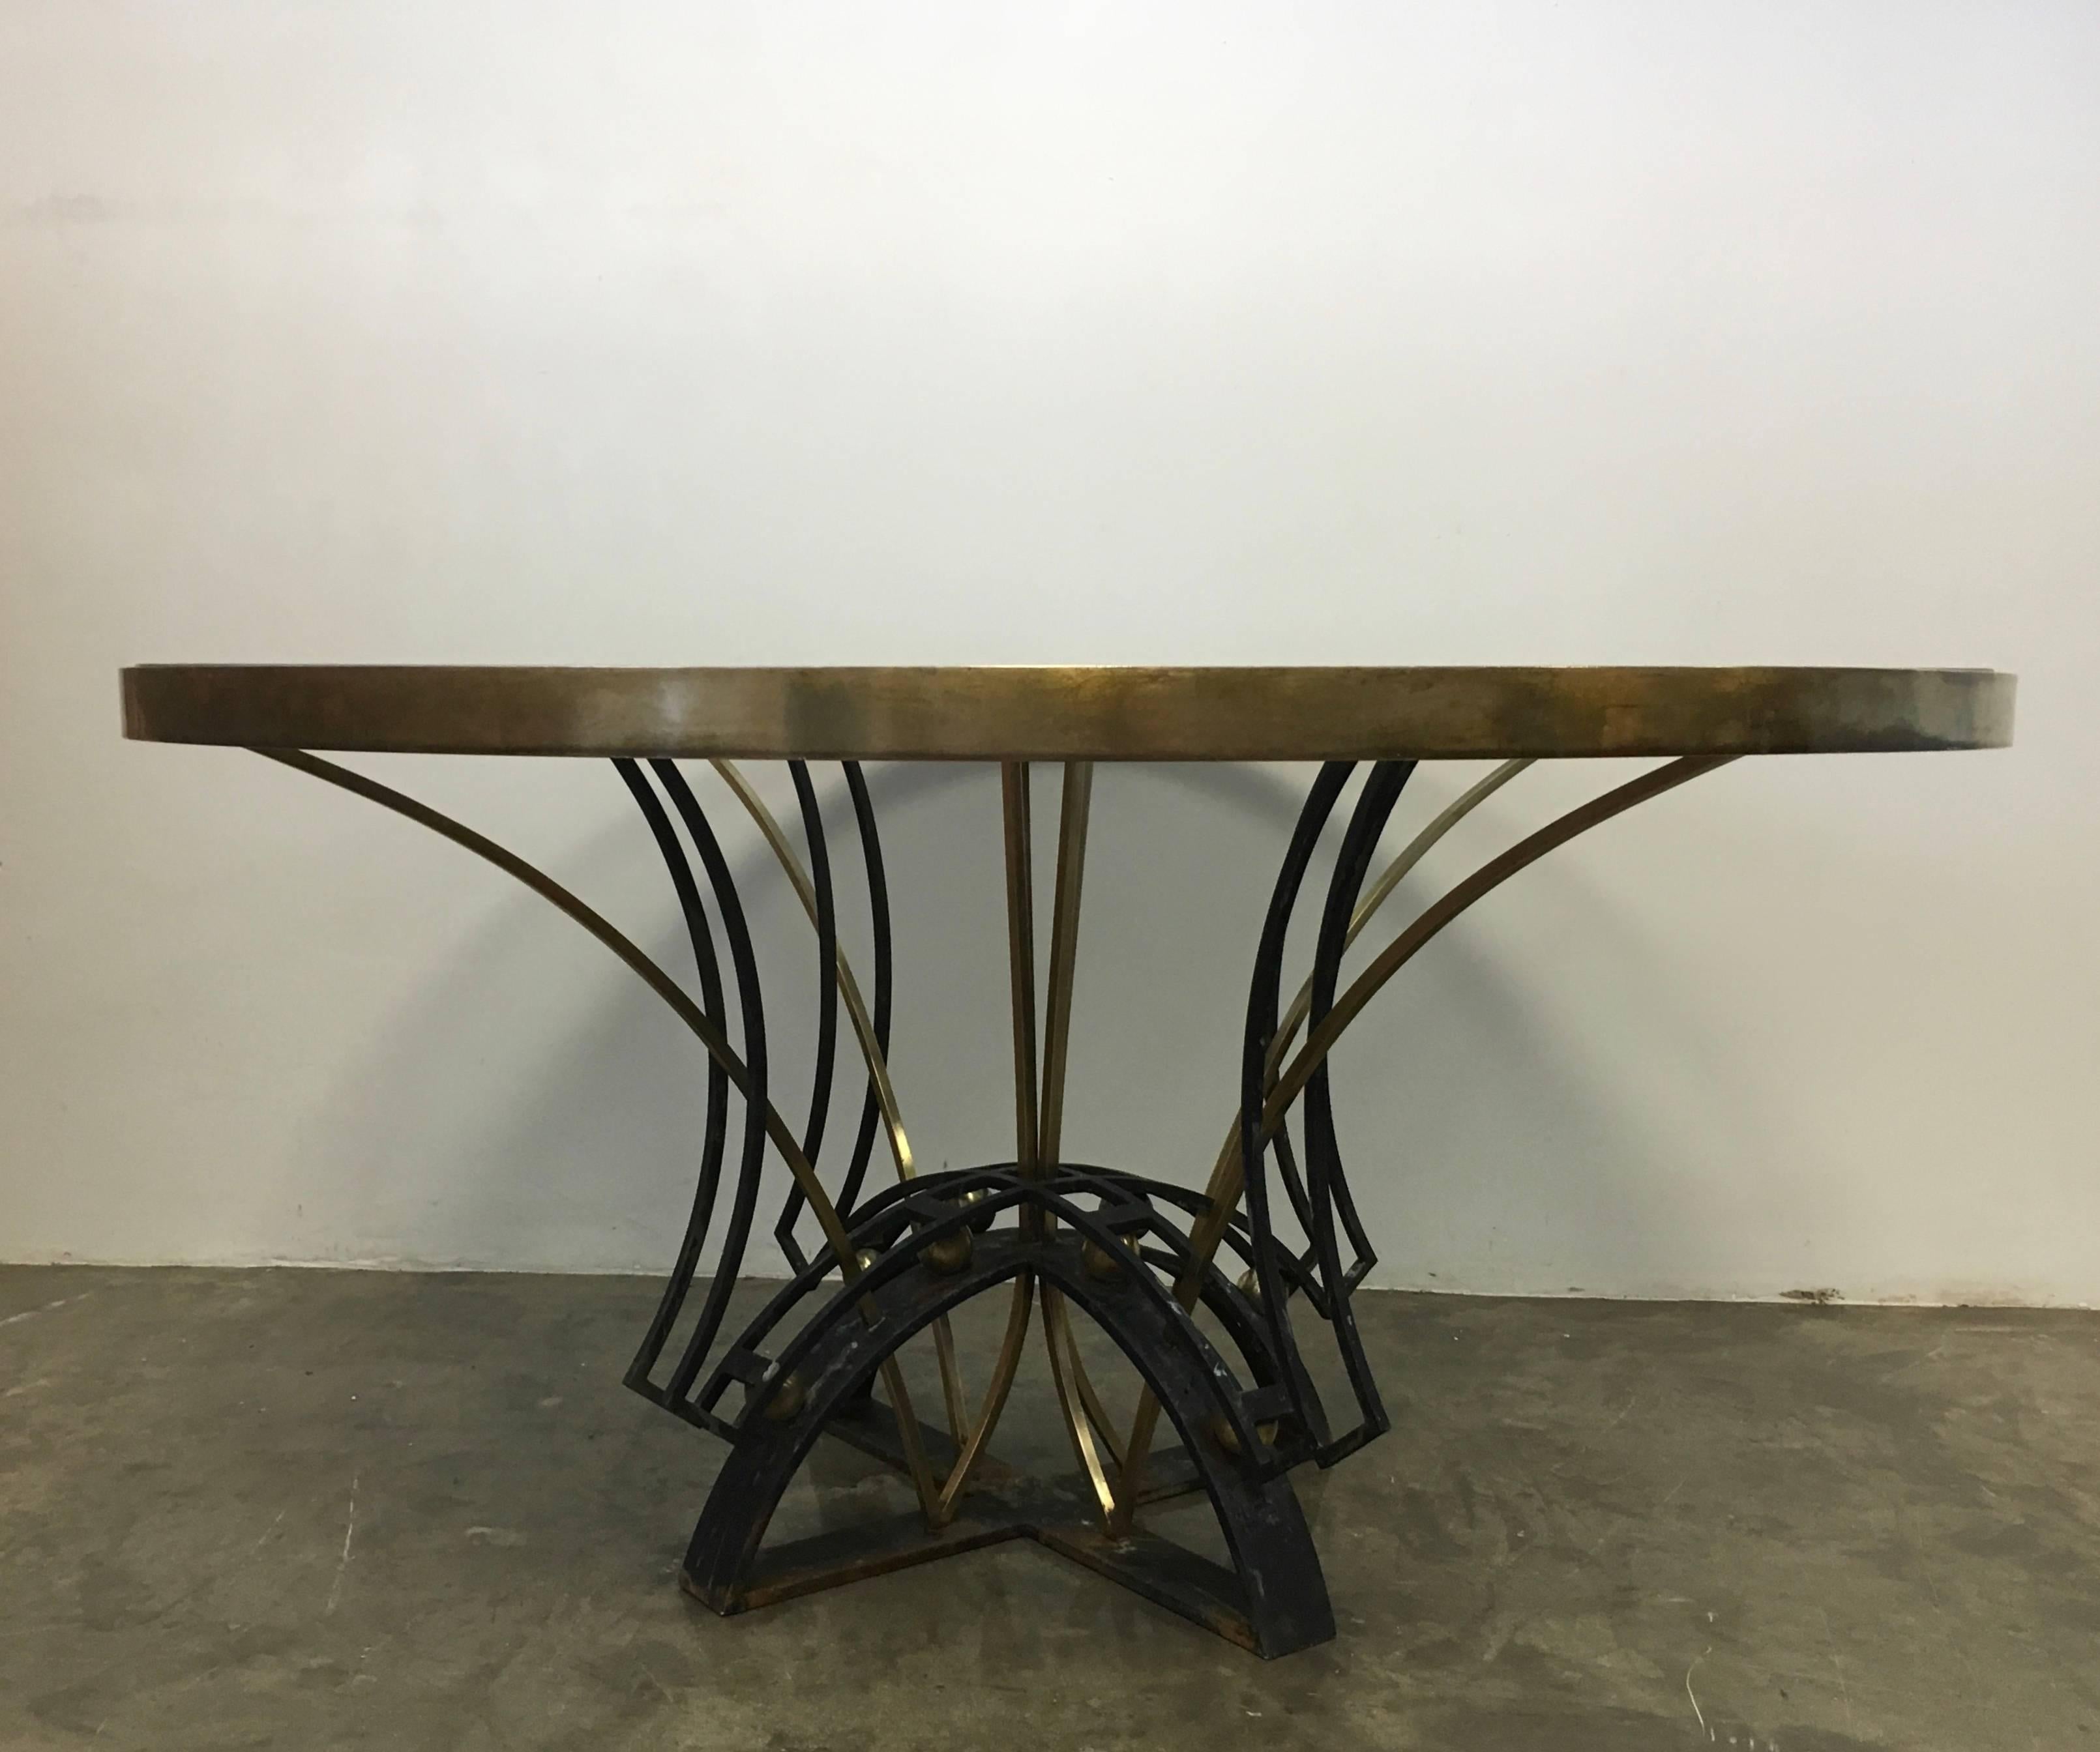 Mid-Century Modern Superb Iron and Brass Round Dining Table by Arturo Pani, Mexico City circa 1950s For Sale